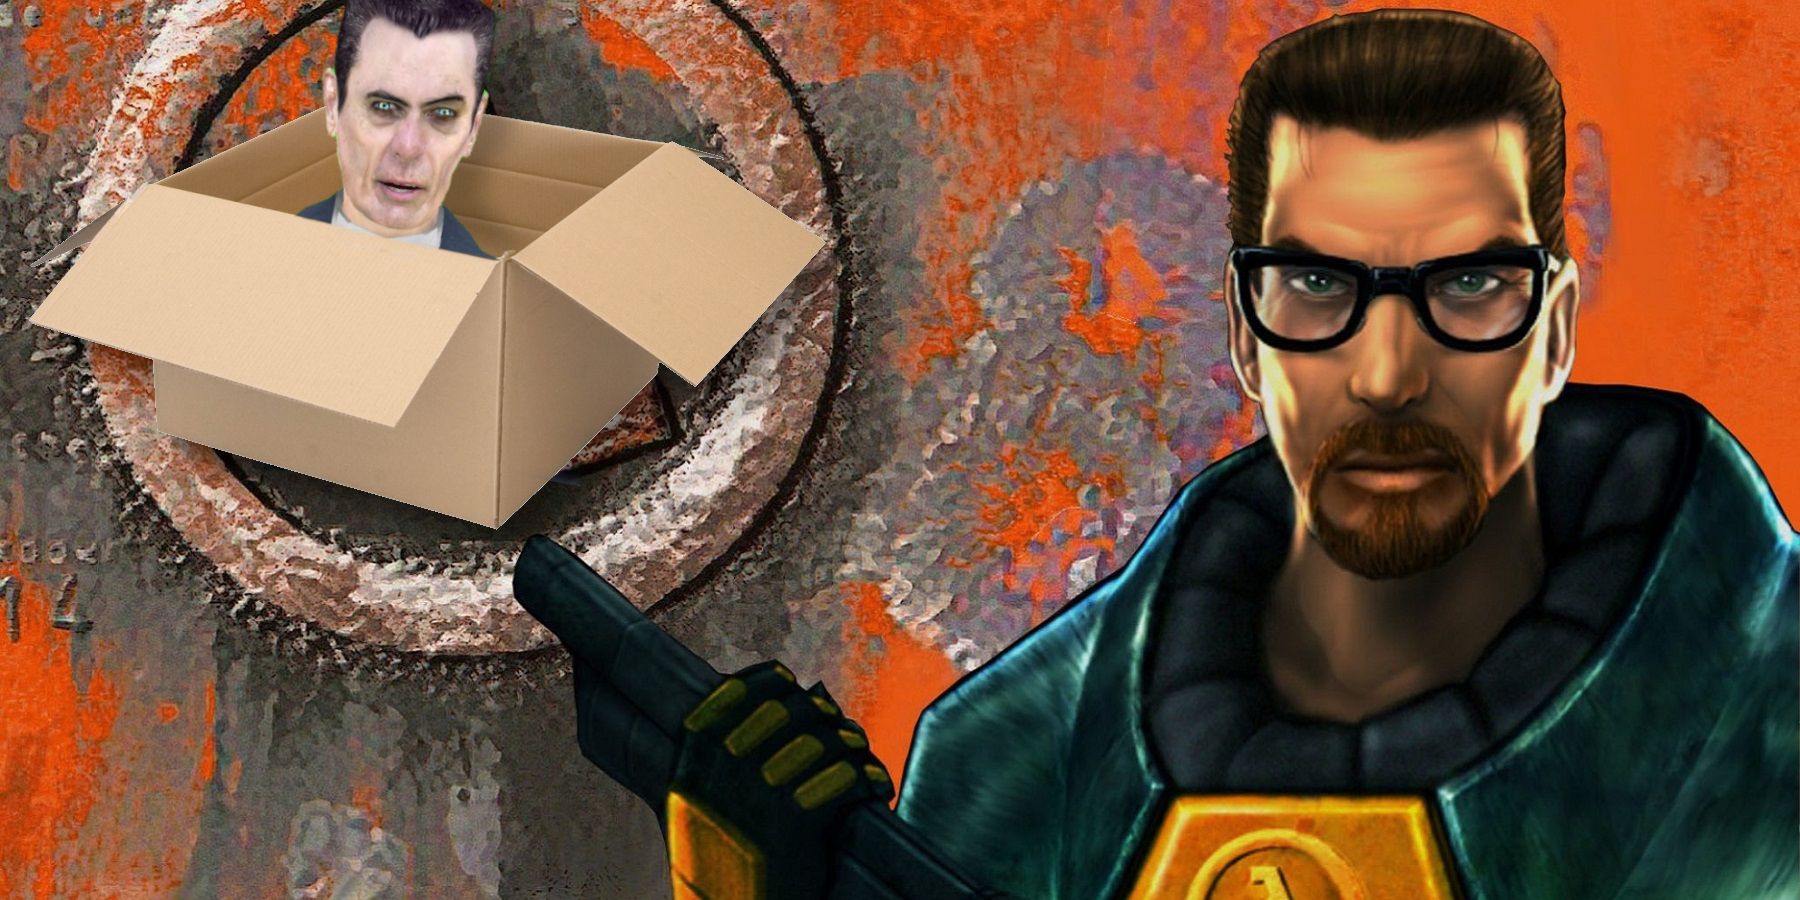 Half-Life Mod Rewards Players With A New Ending If They Carry A Box